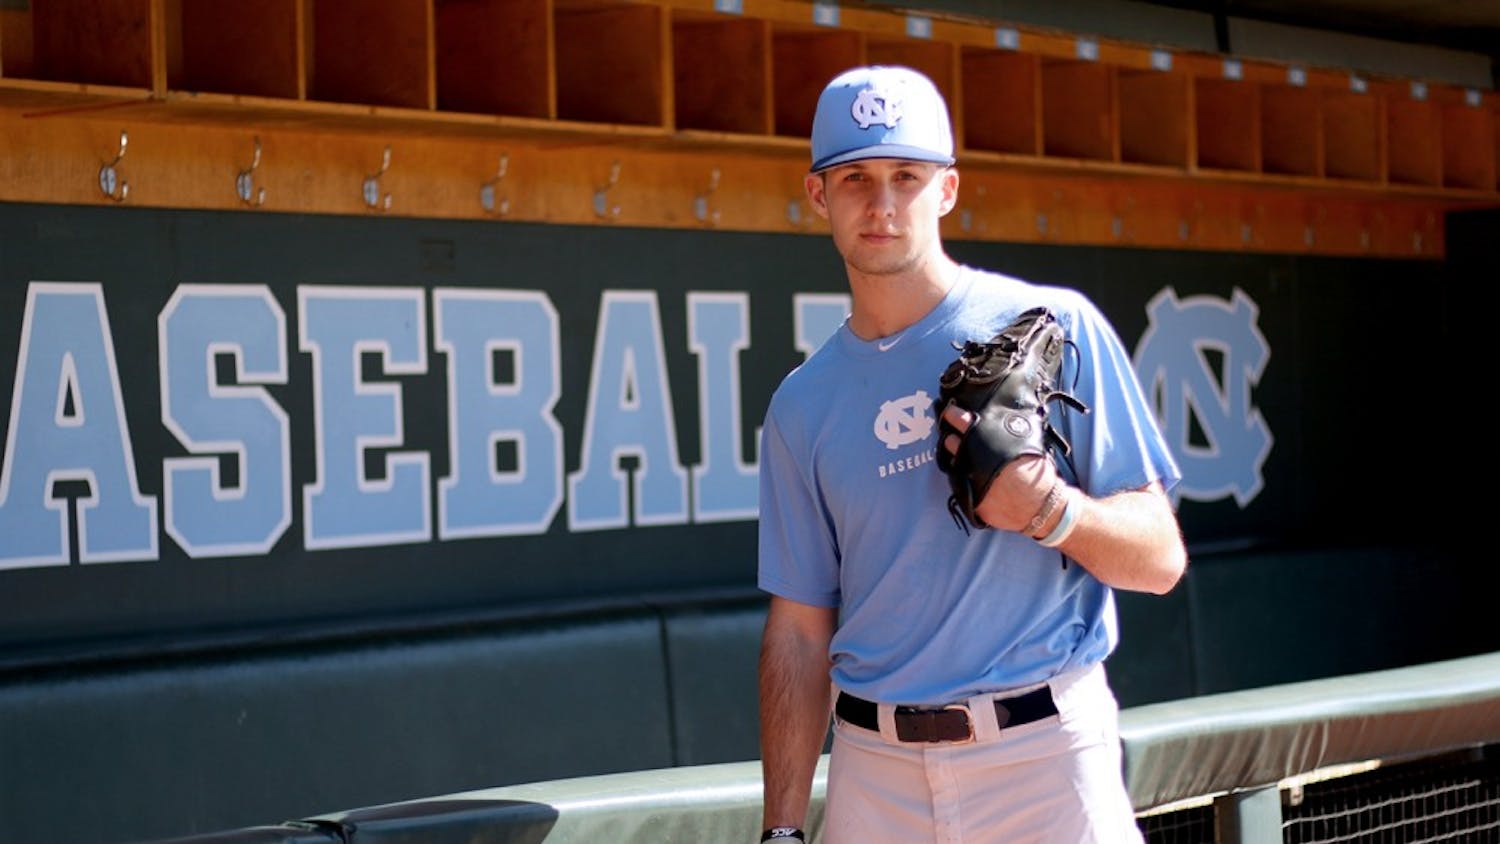 Zac Gallen, a junior undecided major, is one of two captains for the Carolina baseball team.